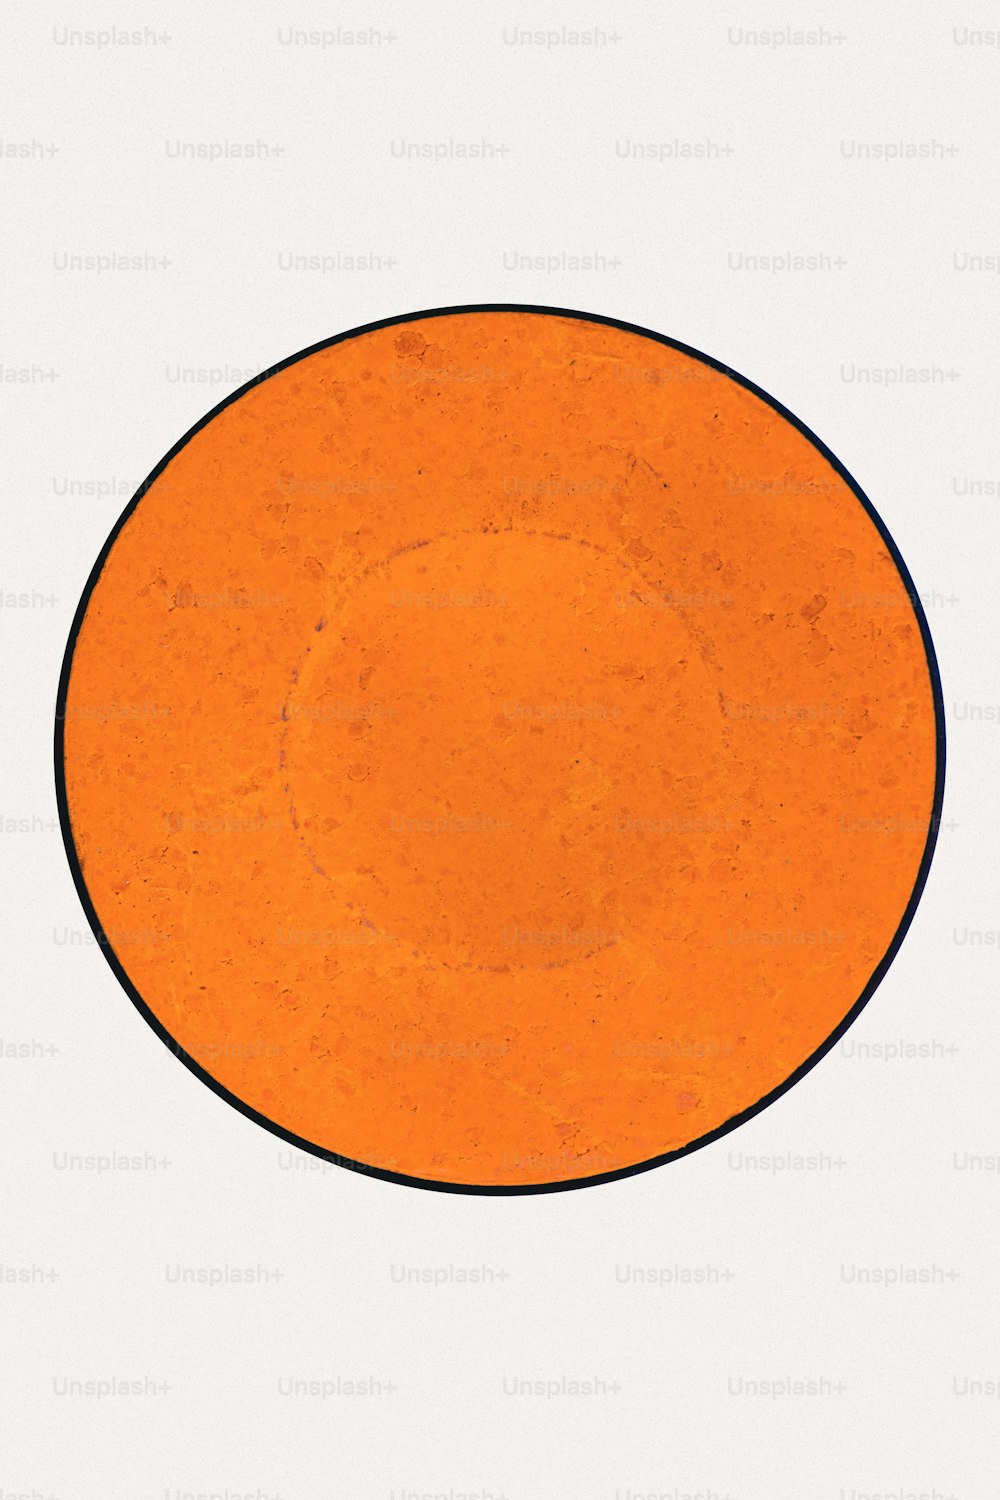 an orange plate with a black border on a white background